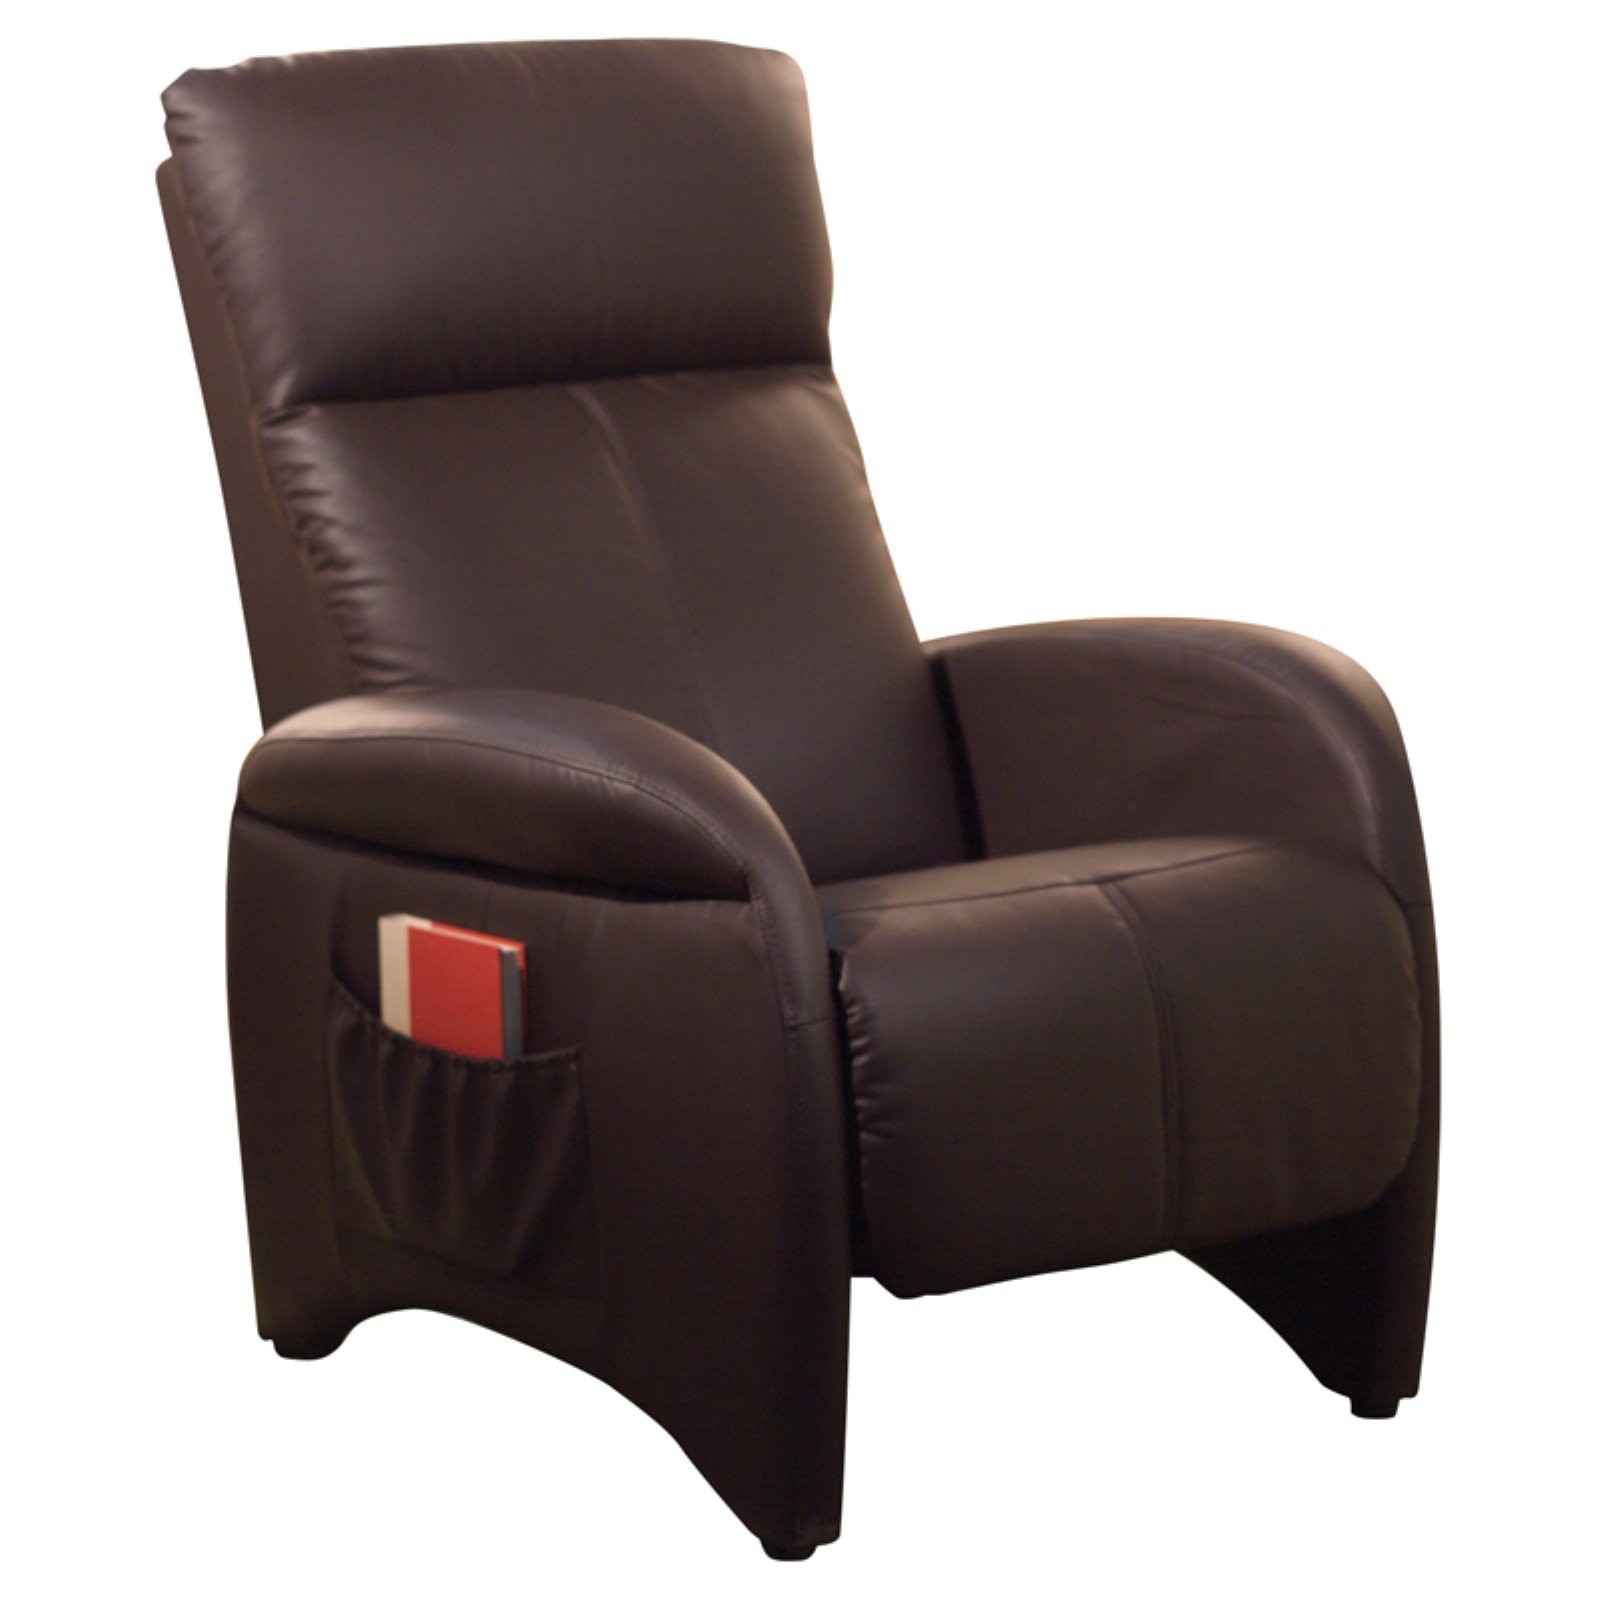 Recliner Chair, This Comfortable Leather Reclining Footrest Lounge Furniture Is on Sale Now and Looks Beautifully on Your Living Room, Office or Bedroom, Guaranteed. This Modern, Contemporary, Durable Reclining Chair Is a Masterpiece for Your House.